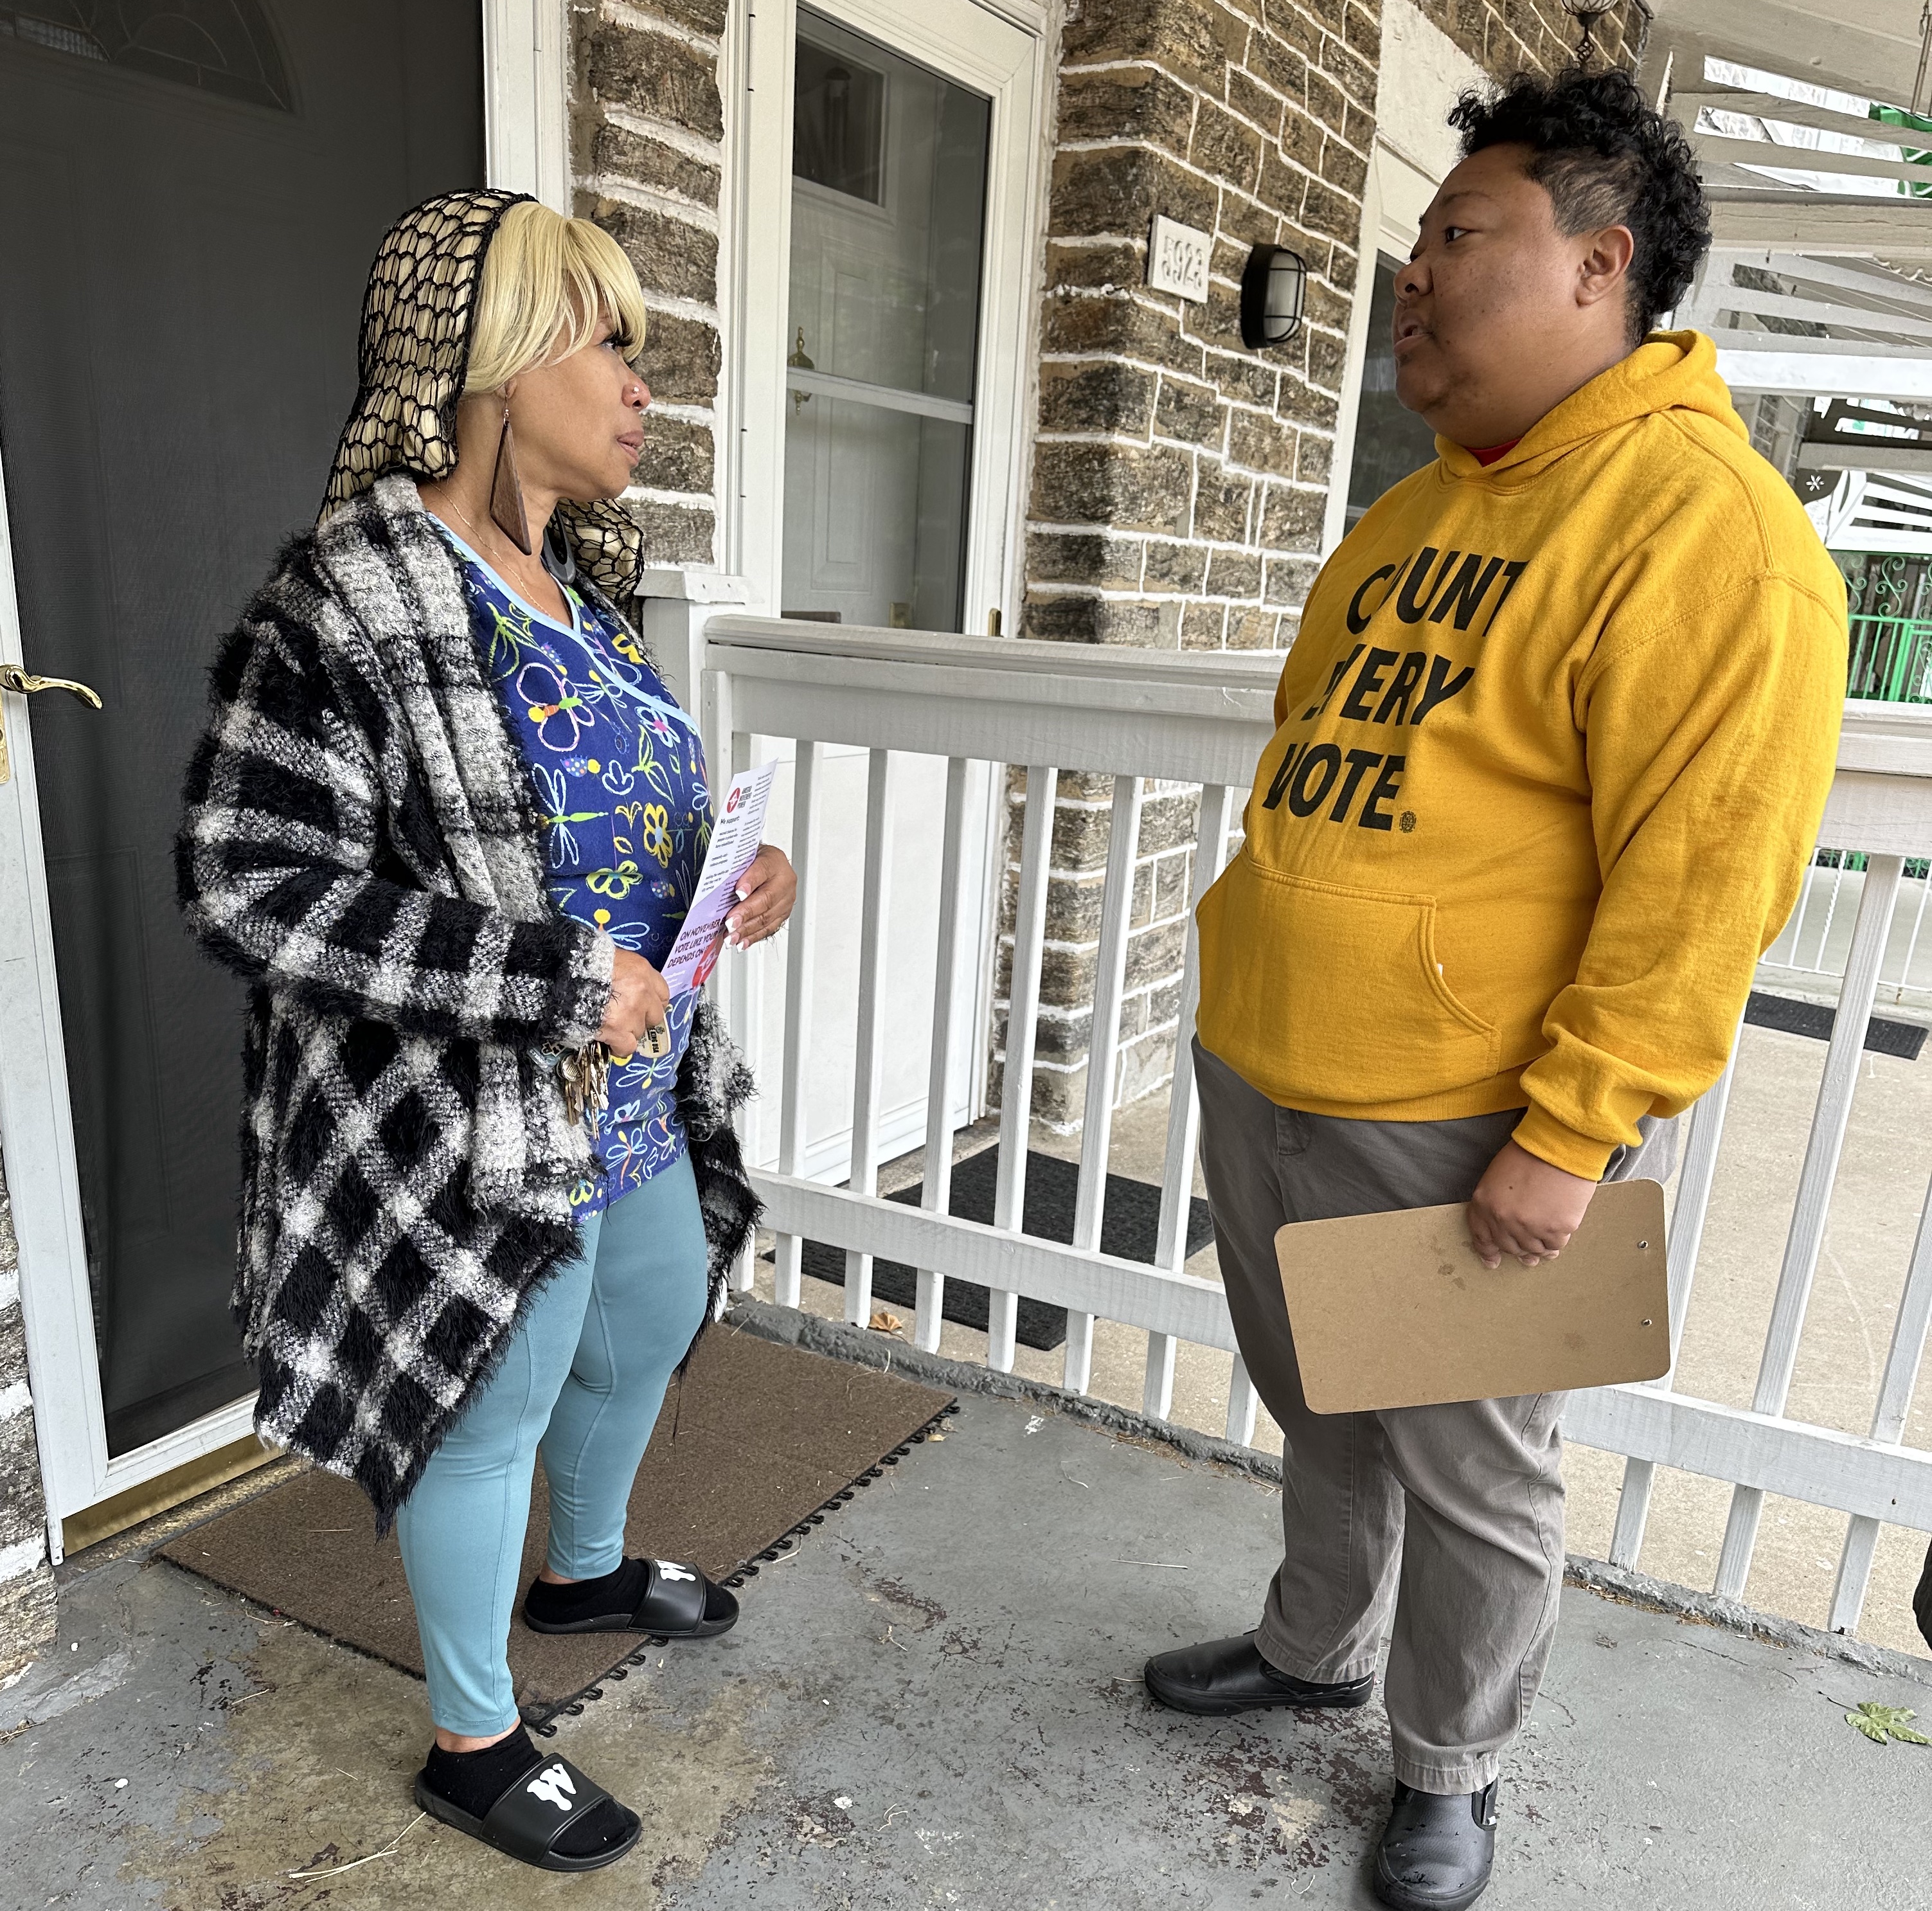 Amistad Movement Power Executive Director Kris Henderson has a discussion with a neighbor in Germantown about the November 8th election